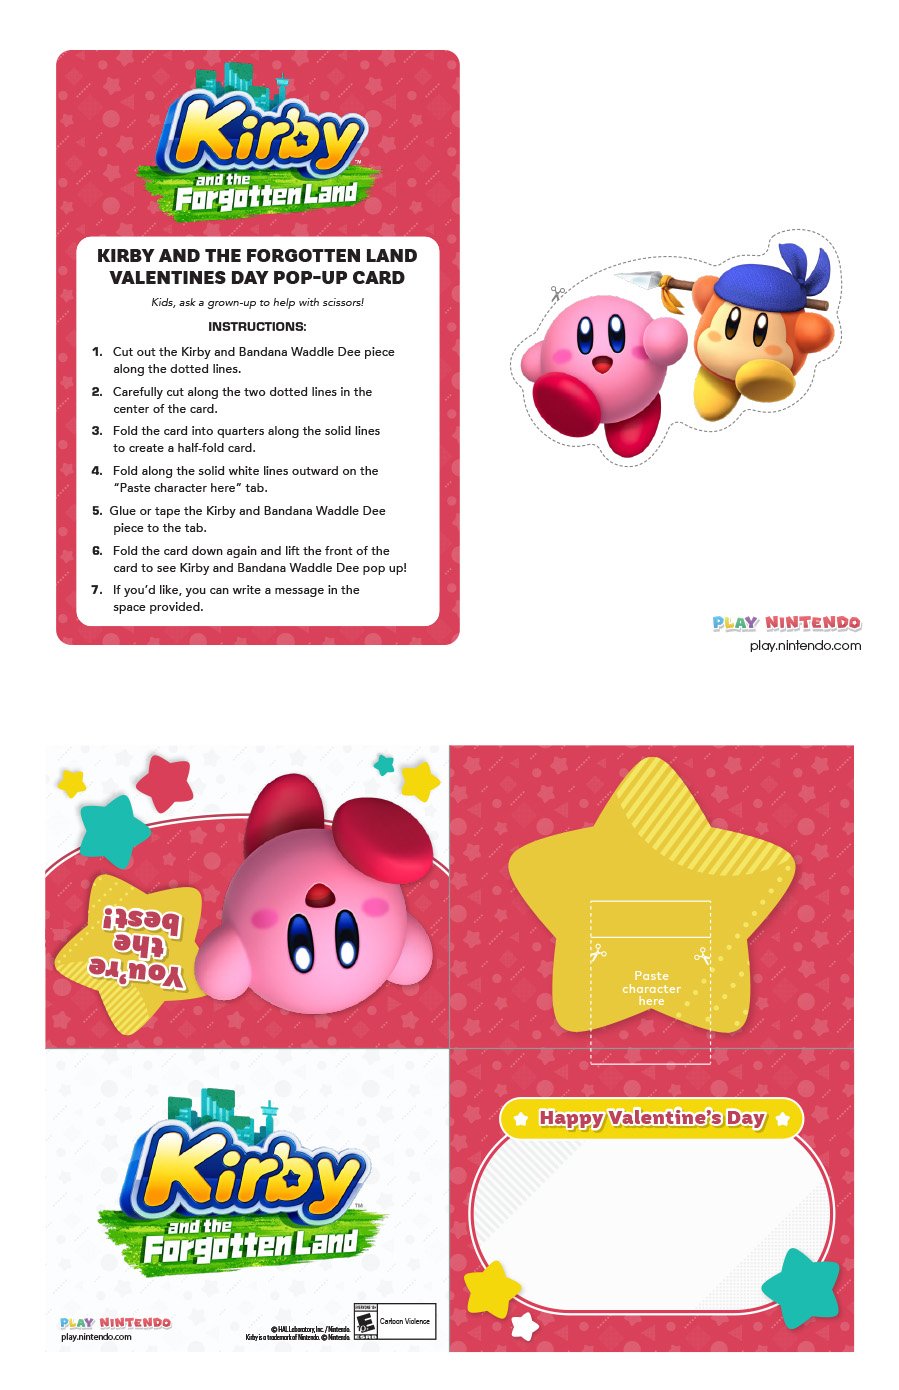 Kirby and the Forgotten Land Valentines Day Pop-Up Card